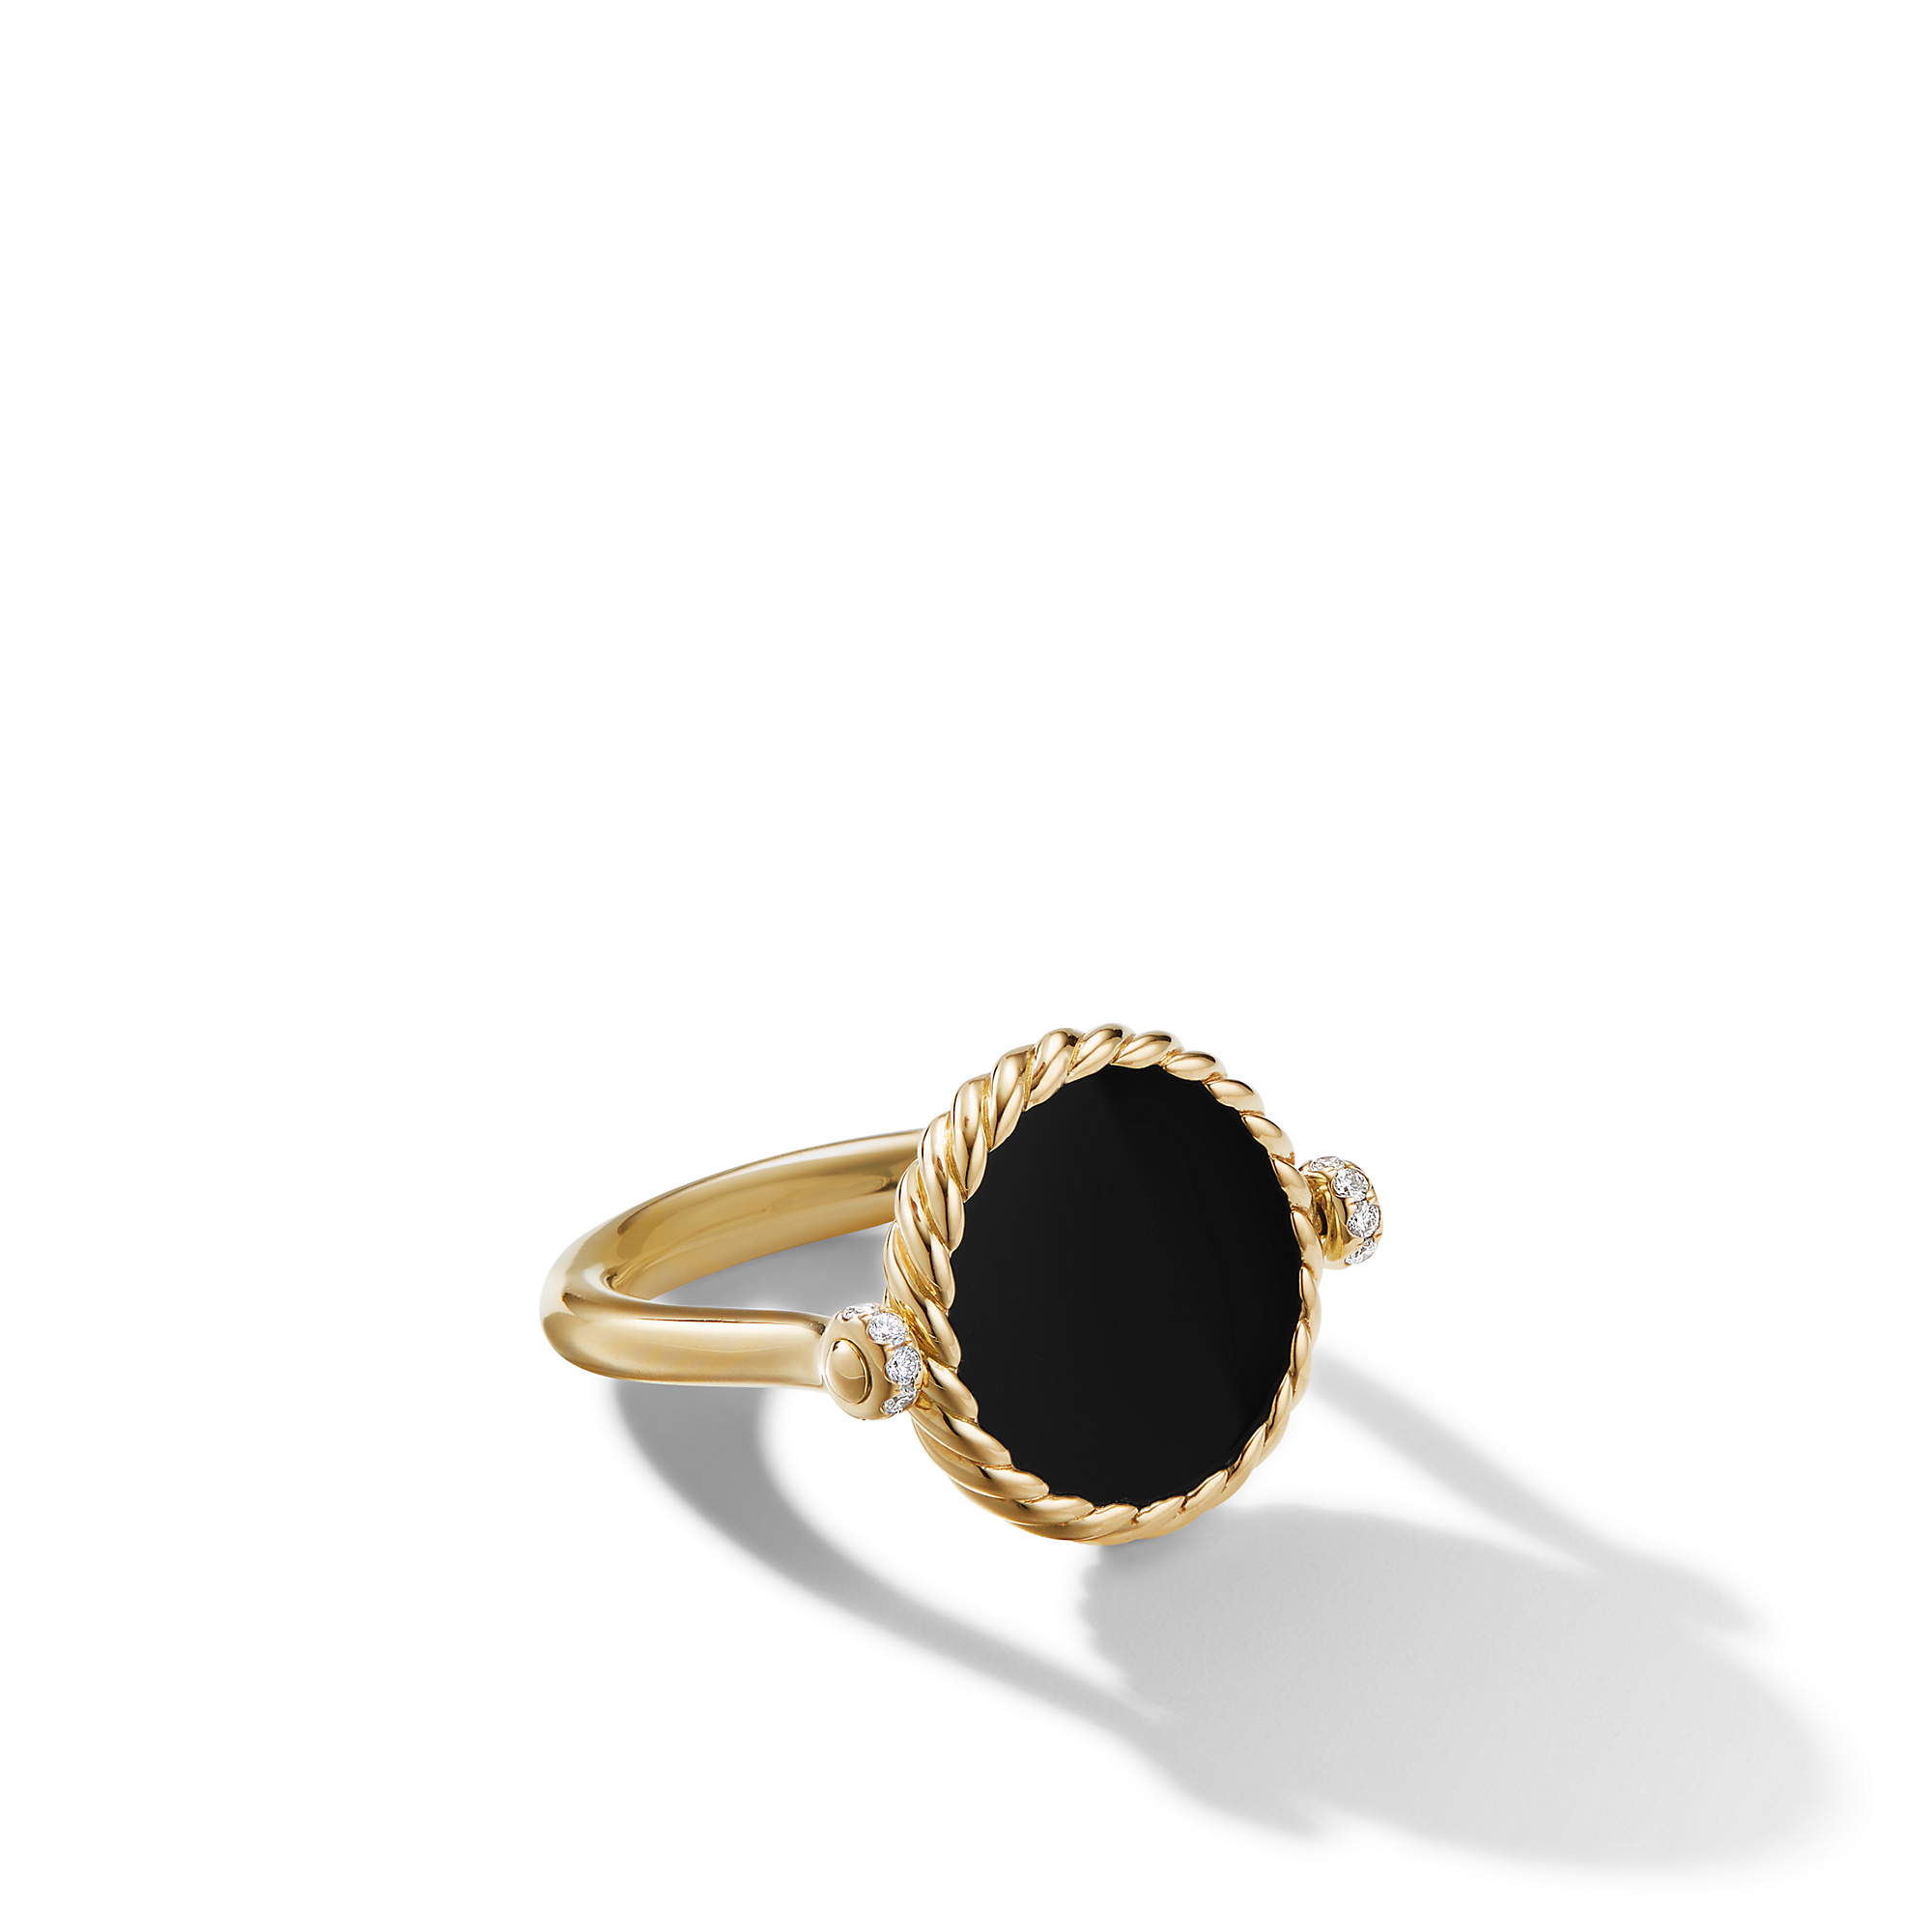 DY Elements® Swivel Ring in 18K Yellow Gold with Black Onyx Reversible to Mother of Pearl and Diamonds, 15mm